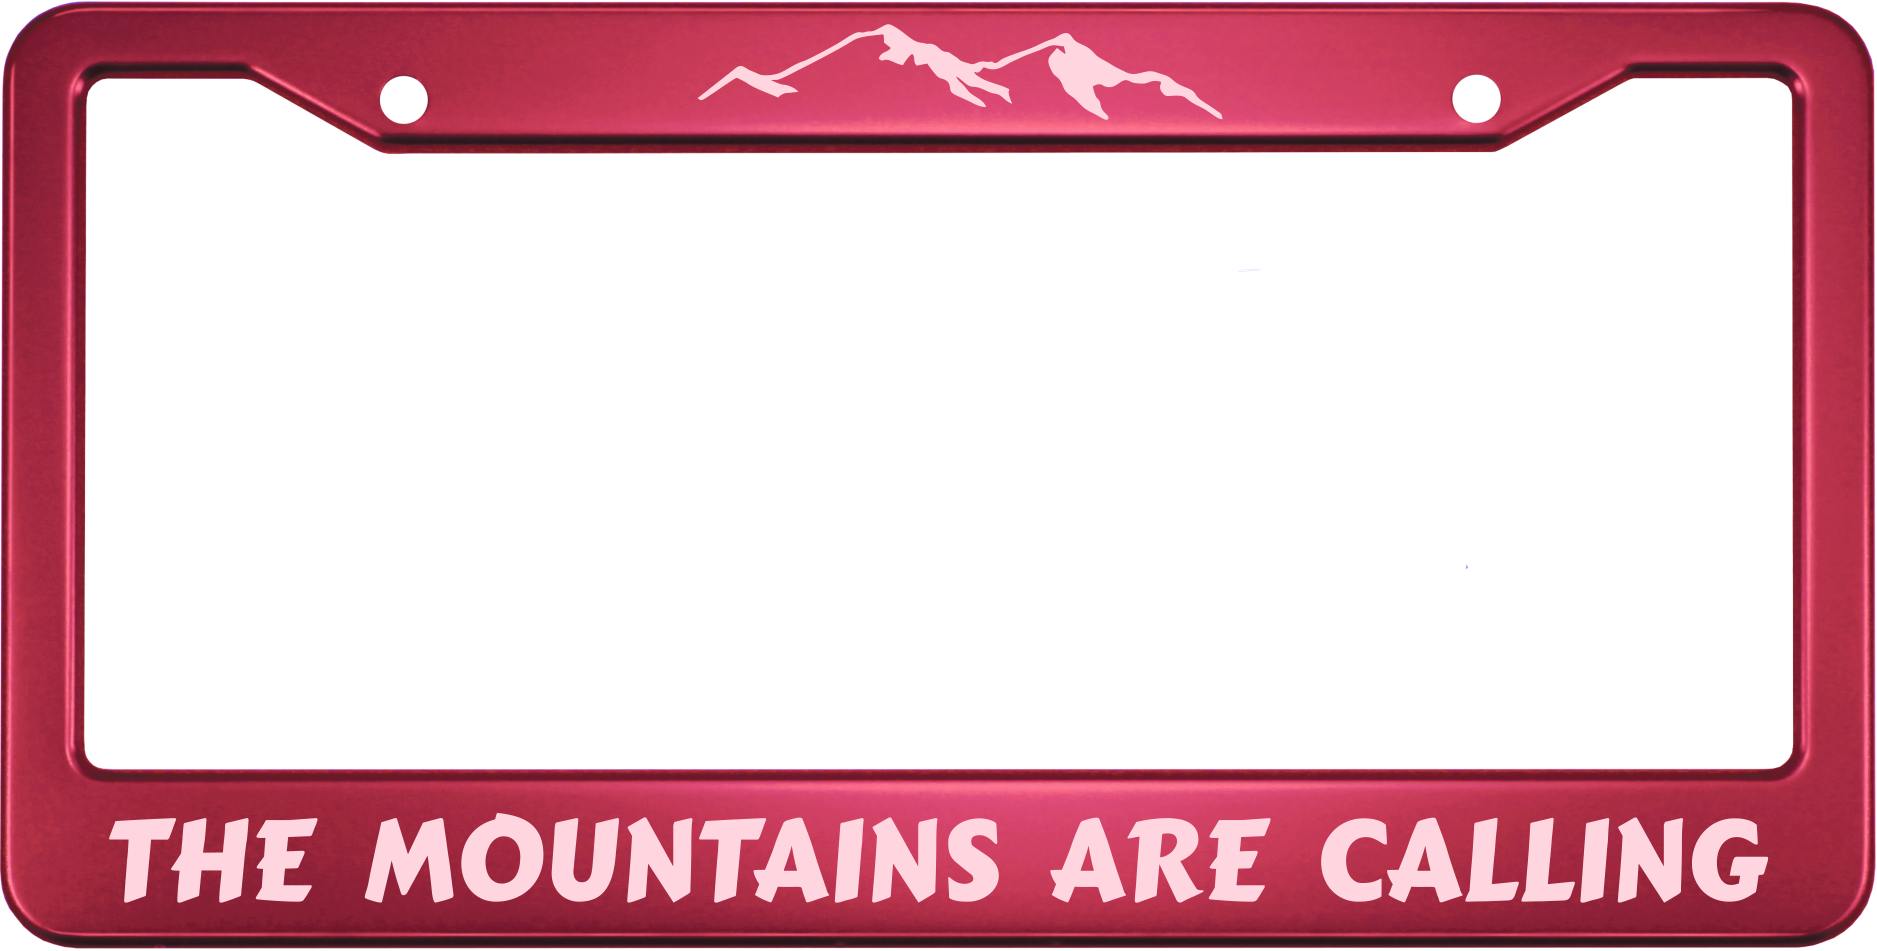 The Mountains Are Calling - Aluminum Car License Plate Frames